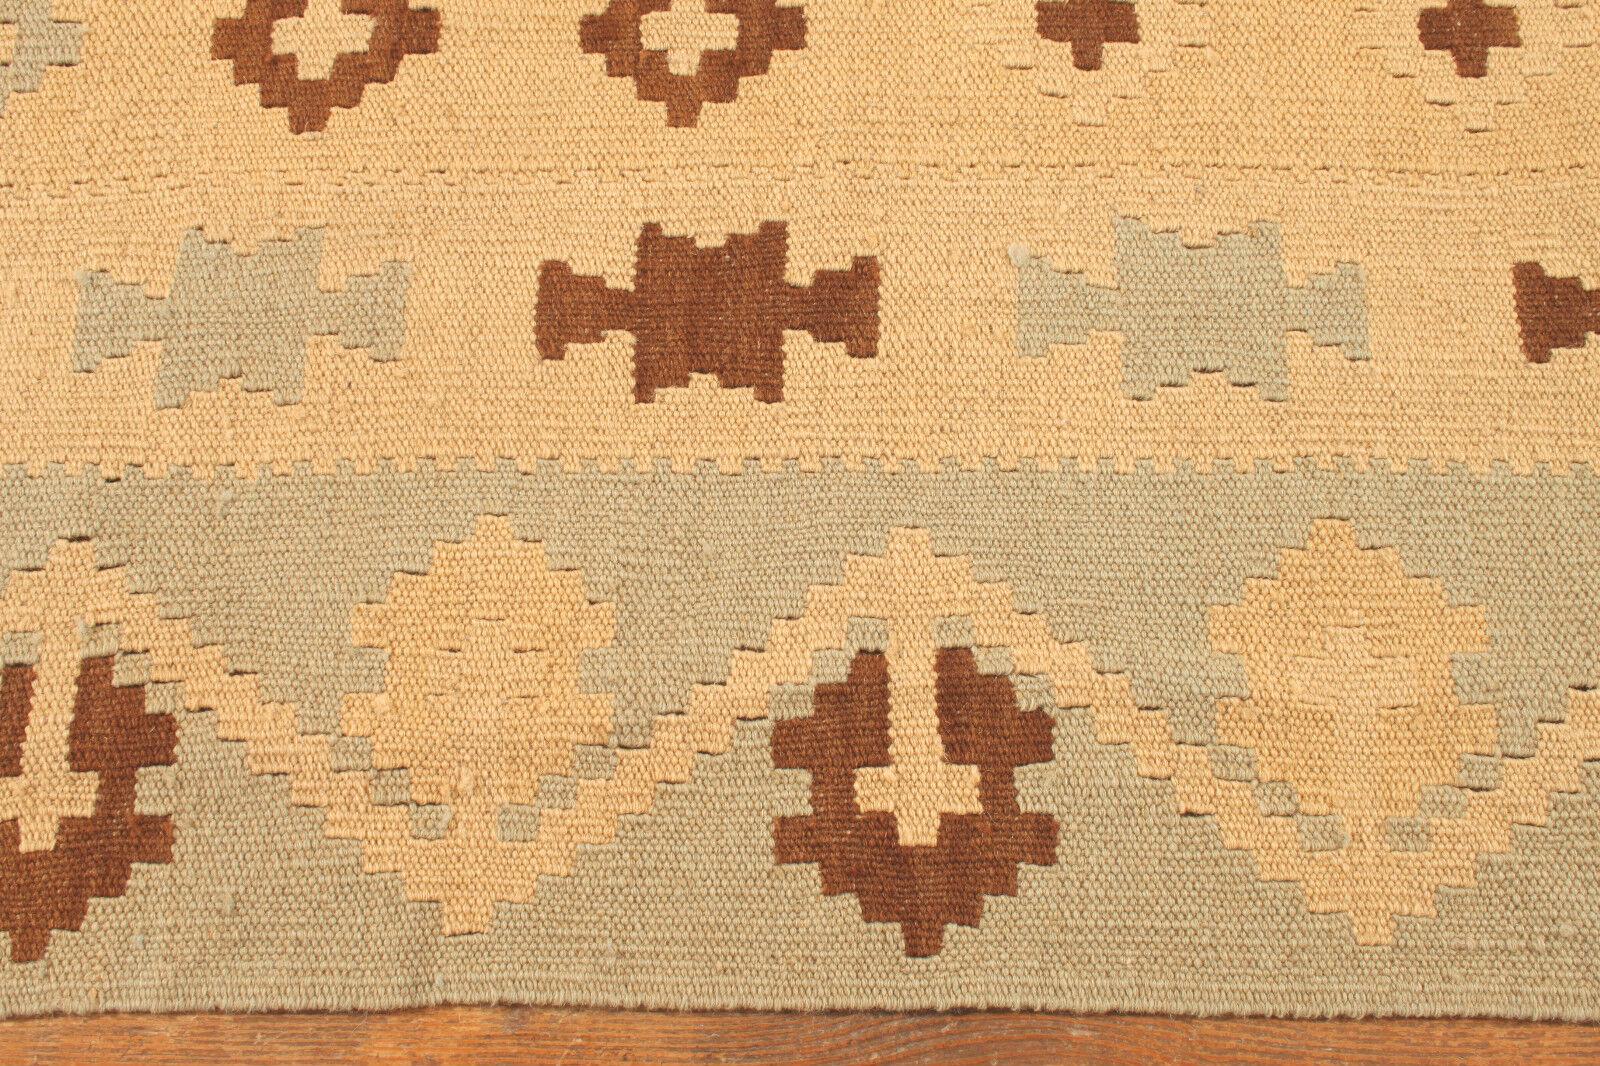 Handmade Vintage Afghan Flatweave Kilim 5.8' x 7.9', 1980s - 1T10 In Good Condition For Sale In Bordeaux, FR